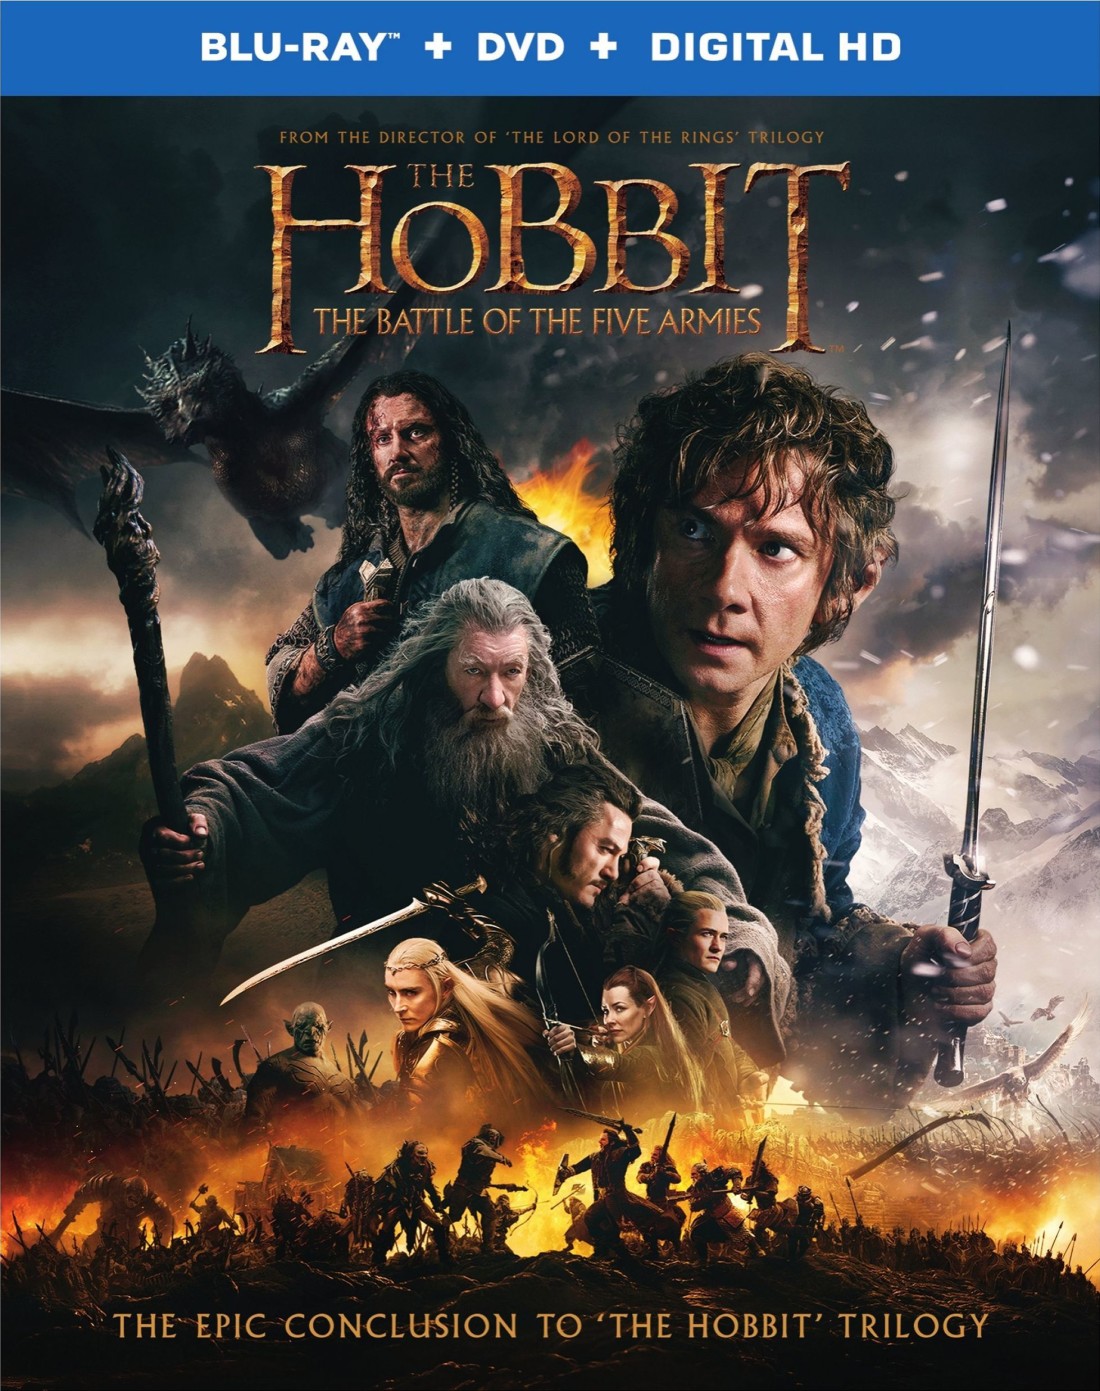 the-hobbit-the-battle-of-the-five-armies-blu-ray-cover-16